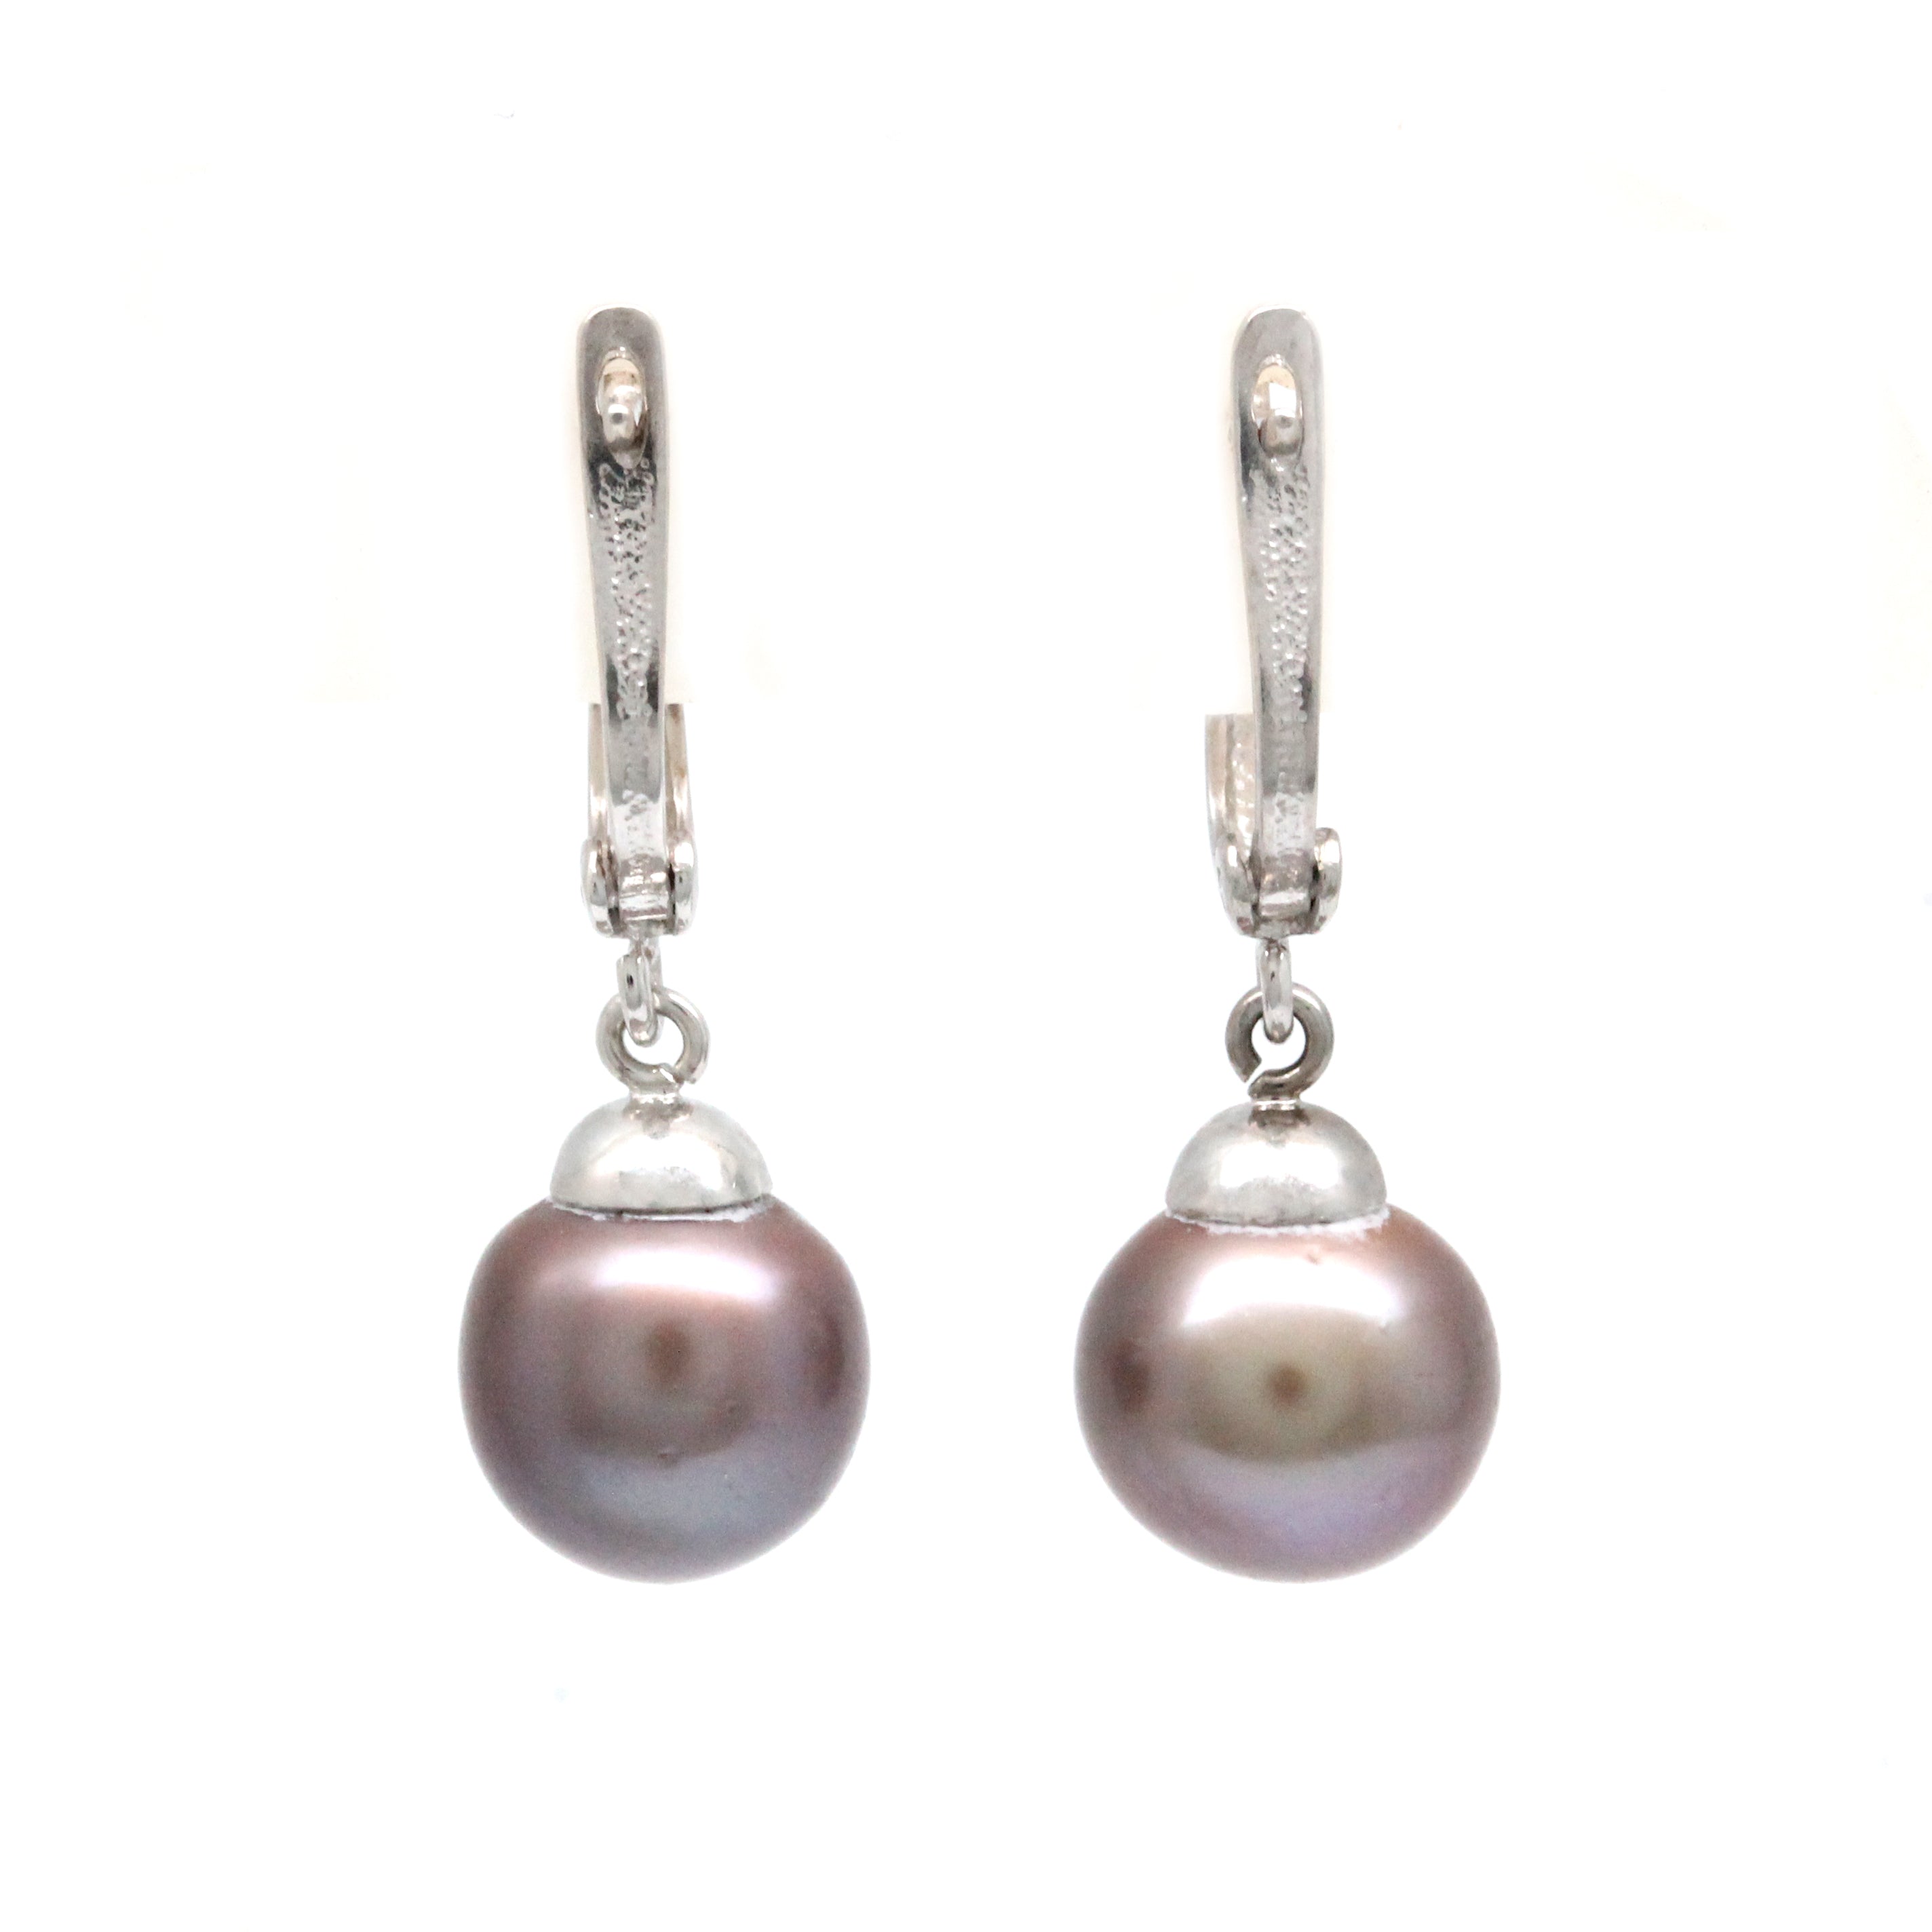 "Lyre" 14K White Gold Earrings with Cortez Pearls